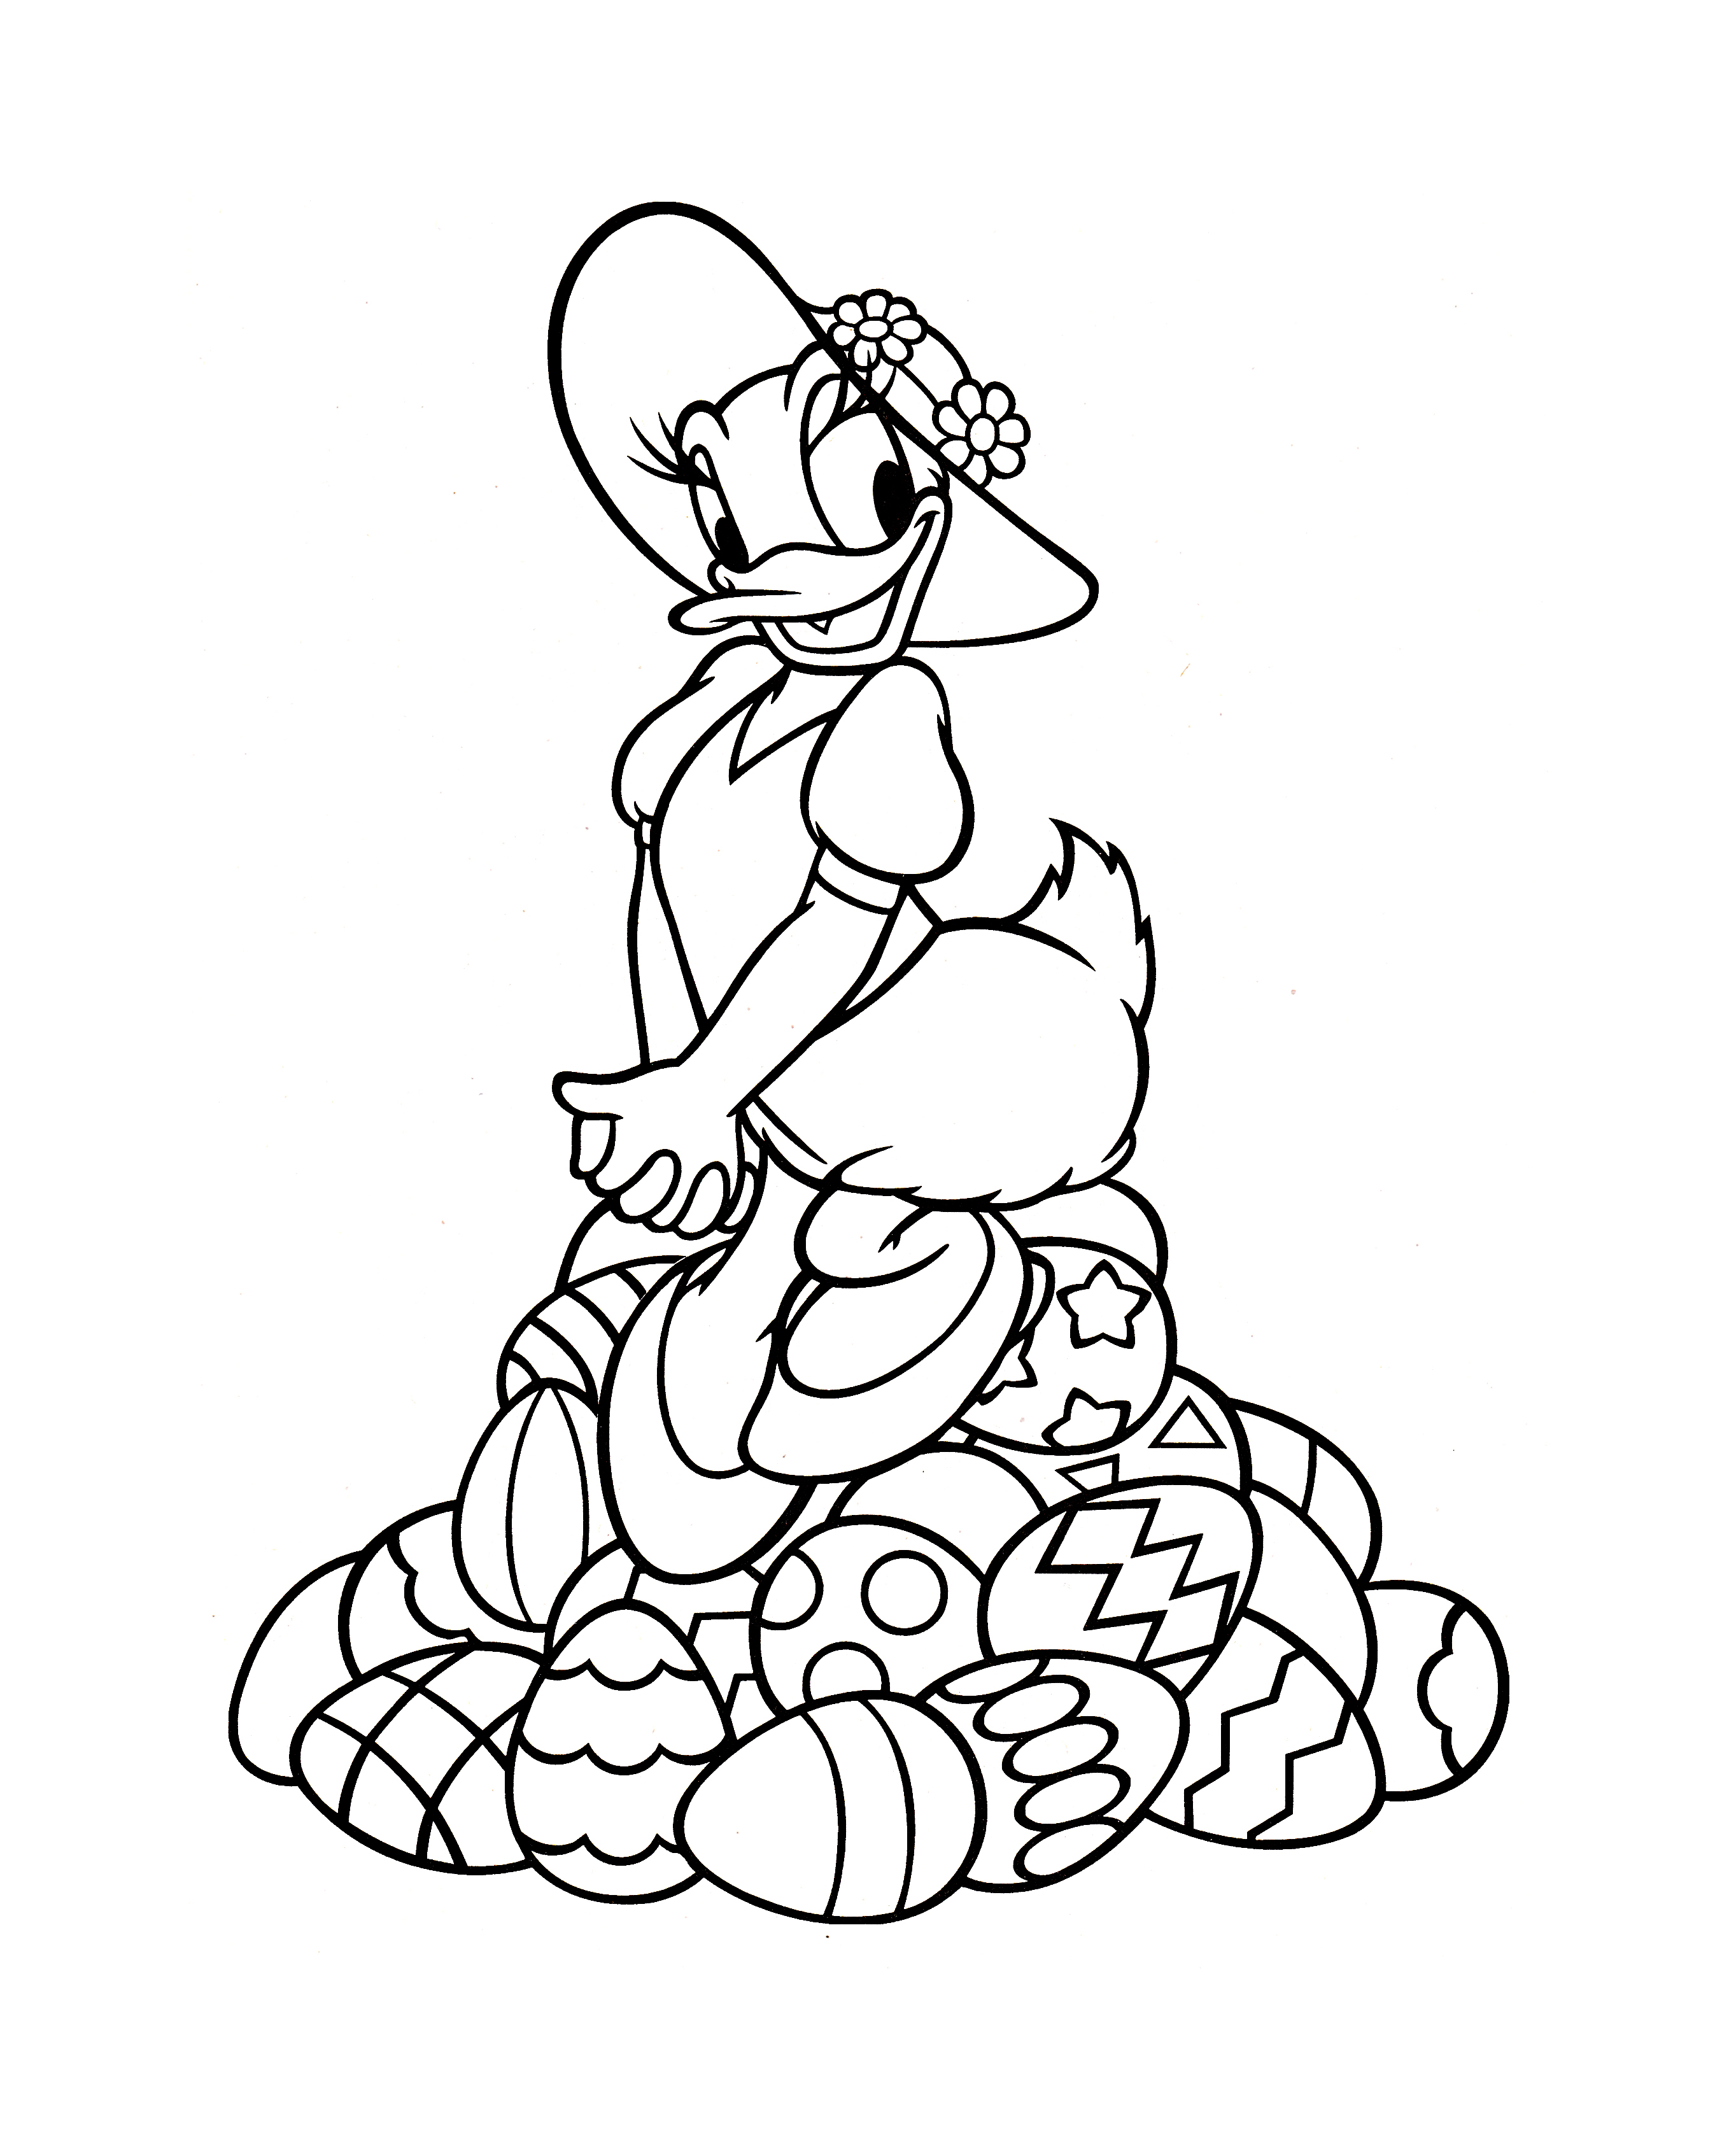 Daisy free to color for children   Daisy Kids Coloring Pages